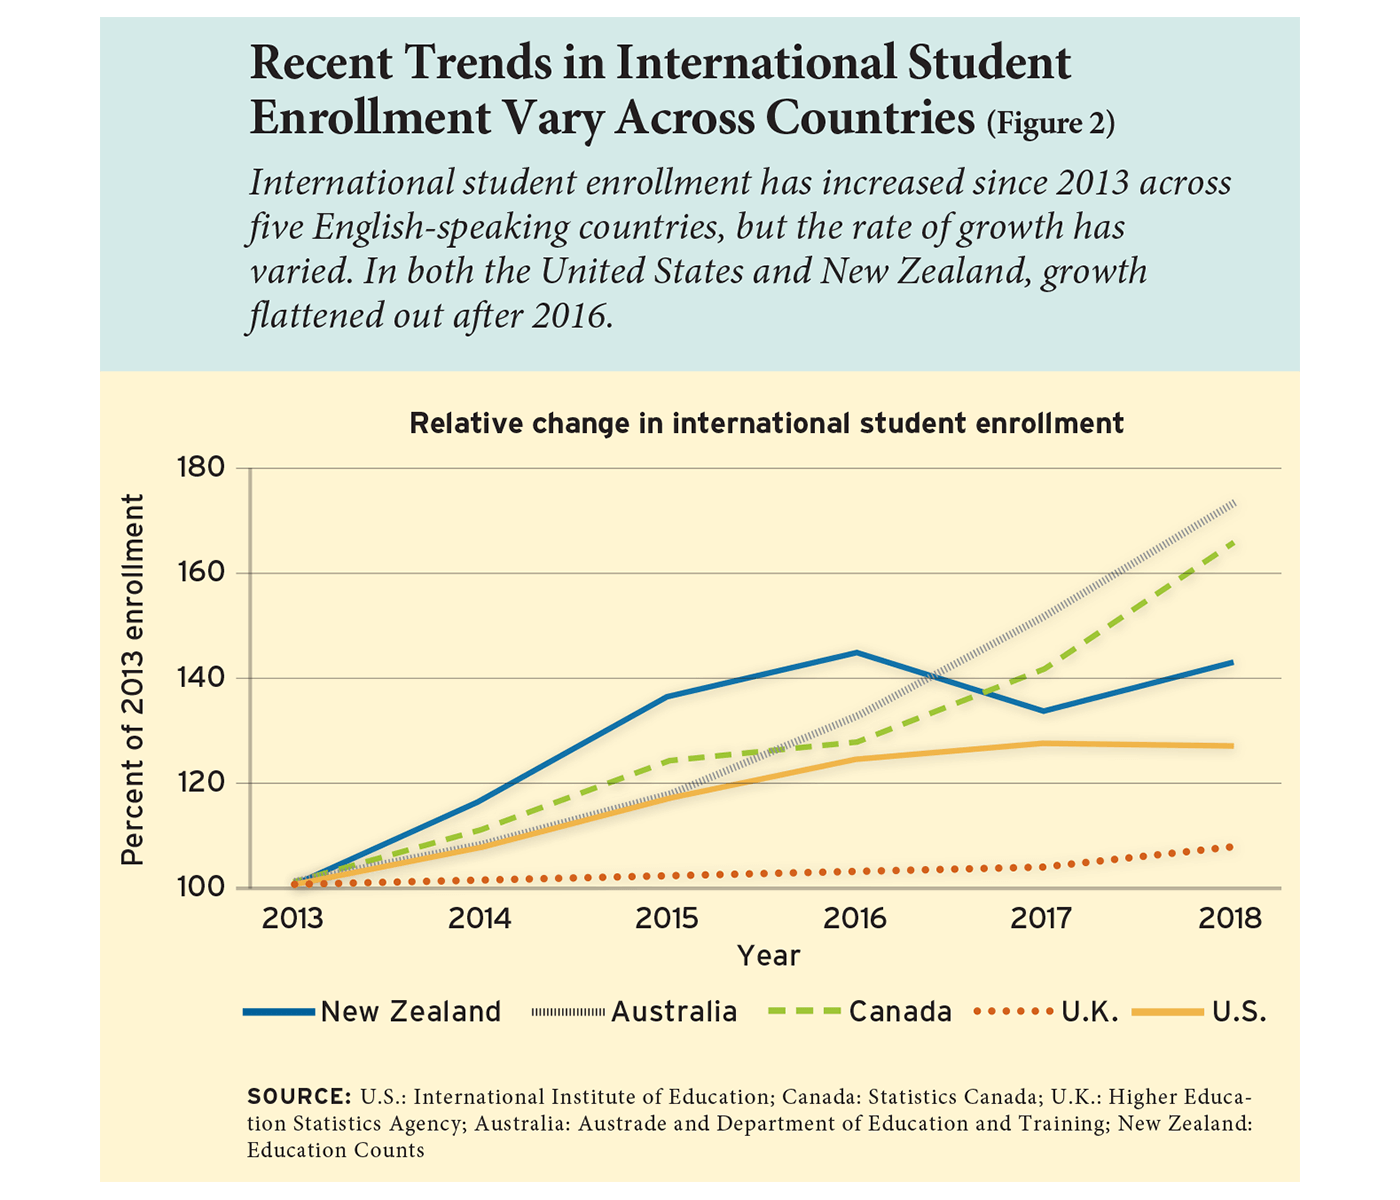 Recent Trends in International Student Enrollment Vary Across Countries (Figure 2)